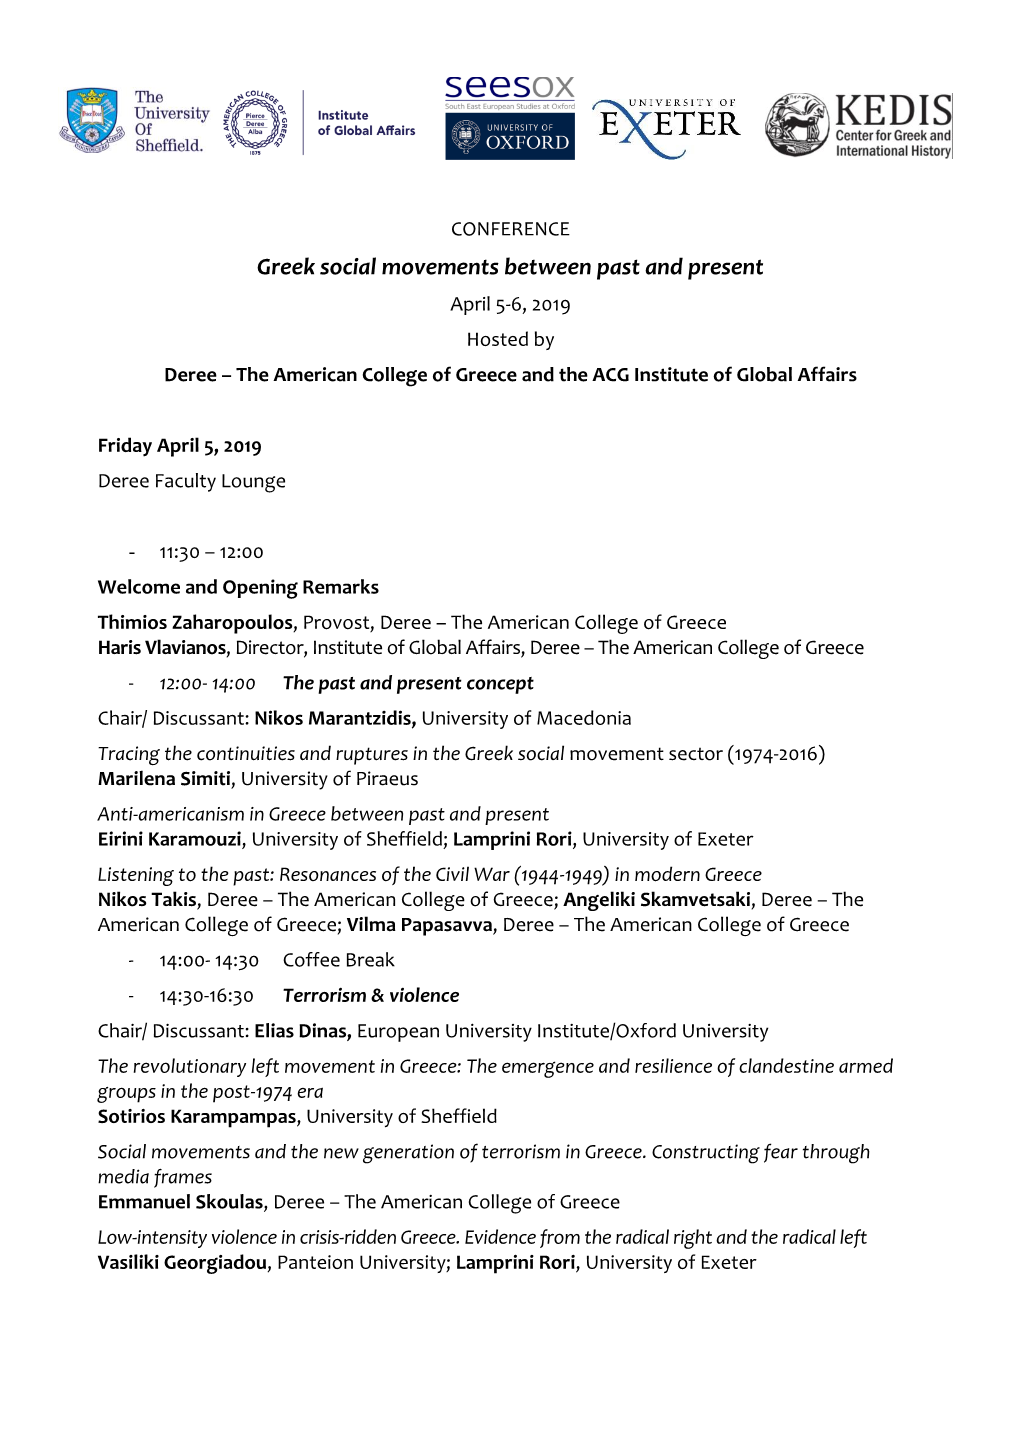 Greek Social Movements Between Past and Present April 5-6, 2019 Hosted by Deree – the American College of Greece and the ACG Institute of Global Affairs